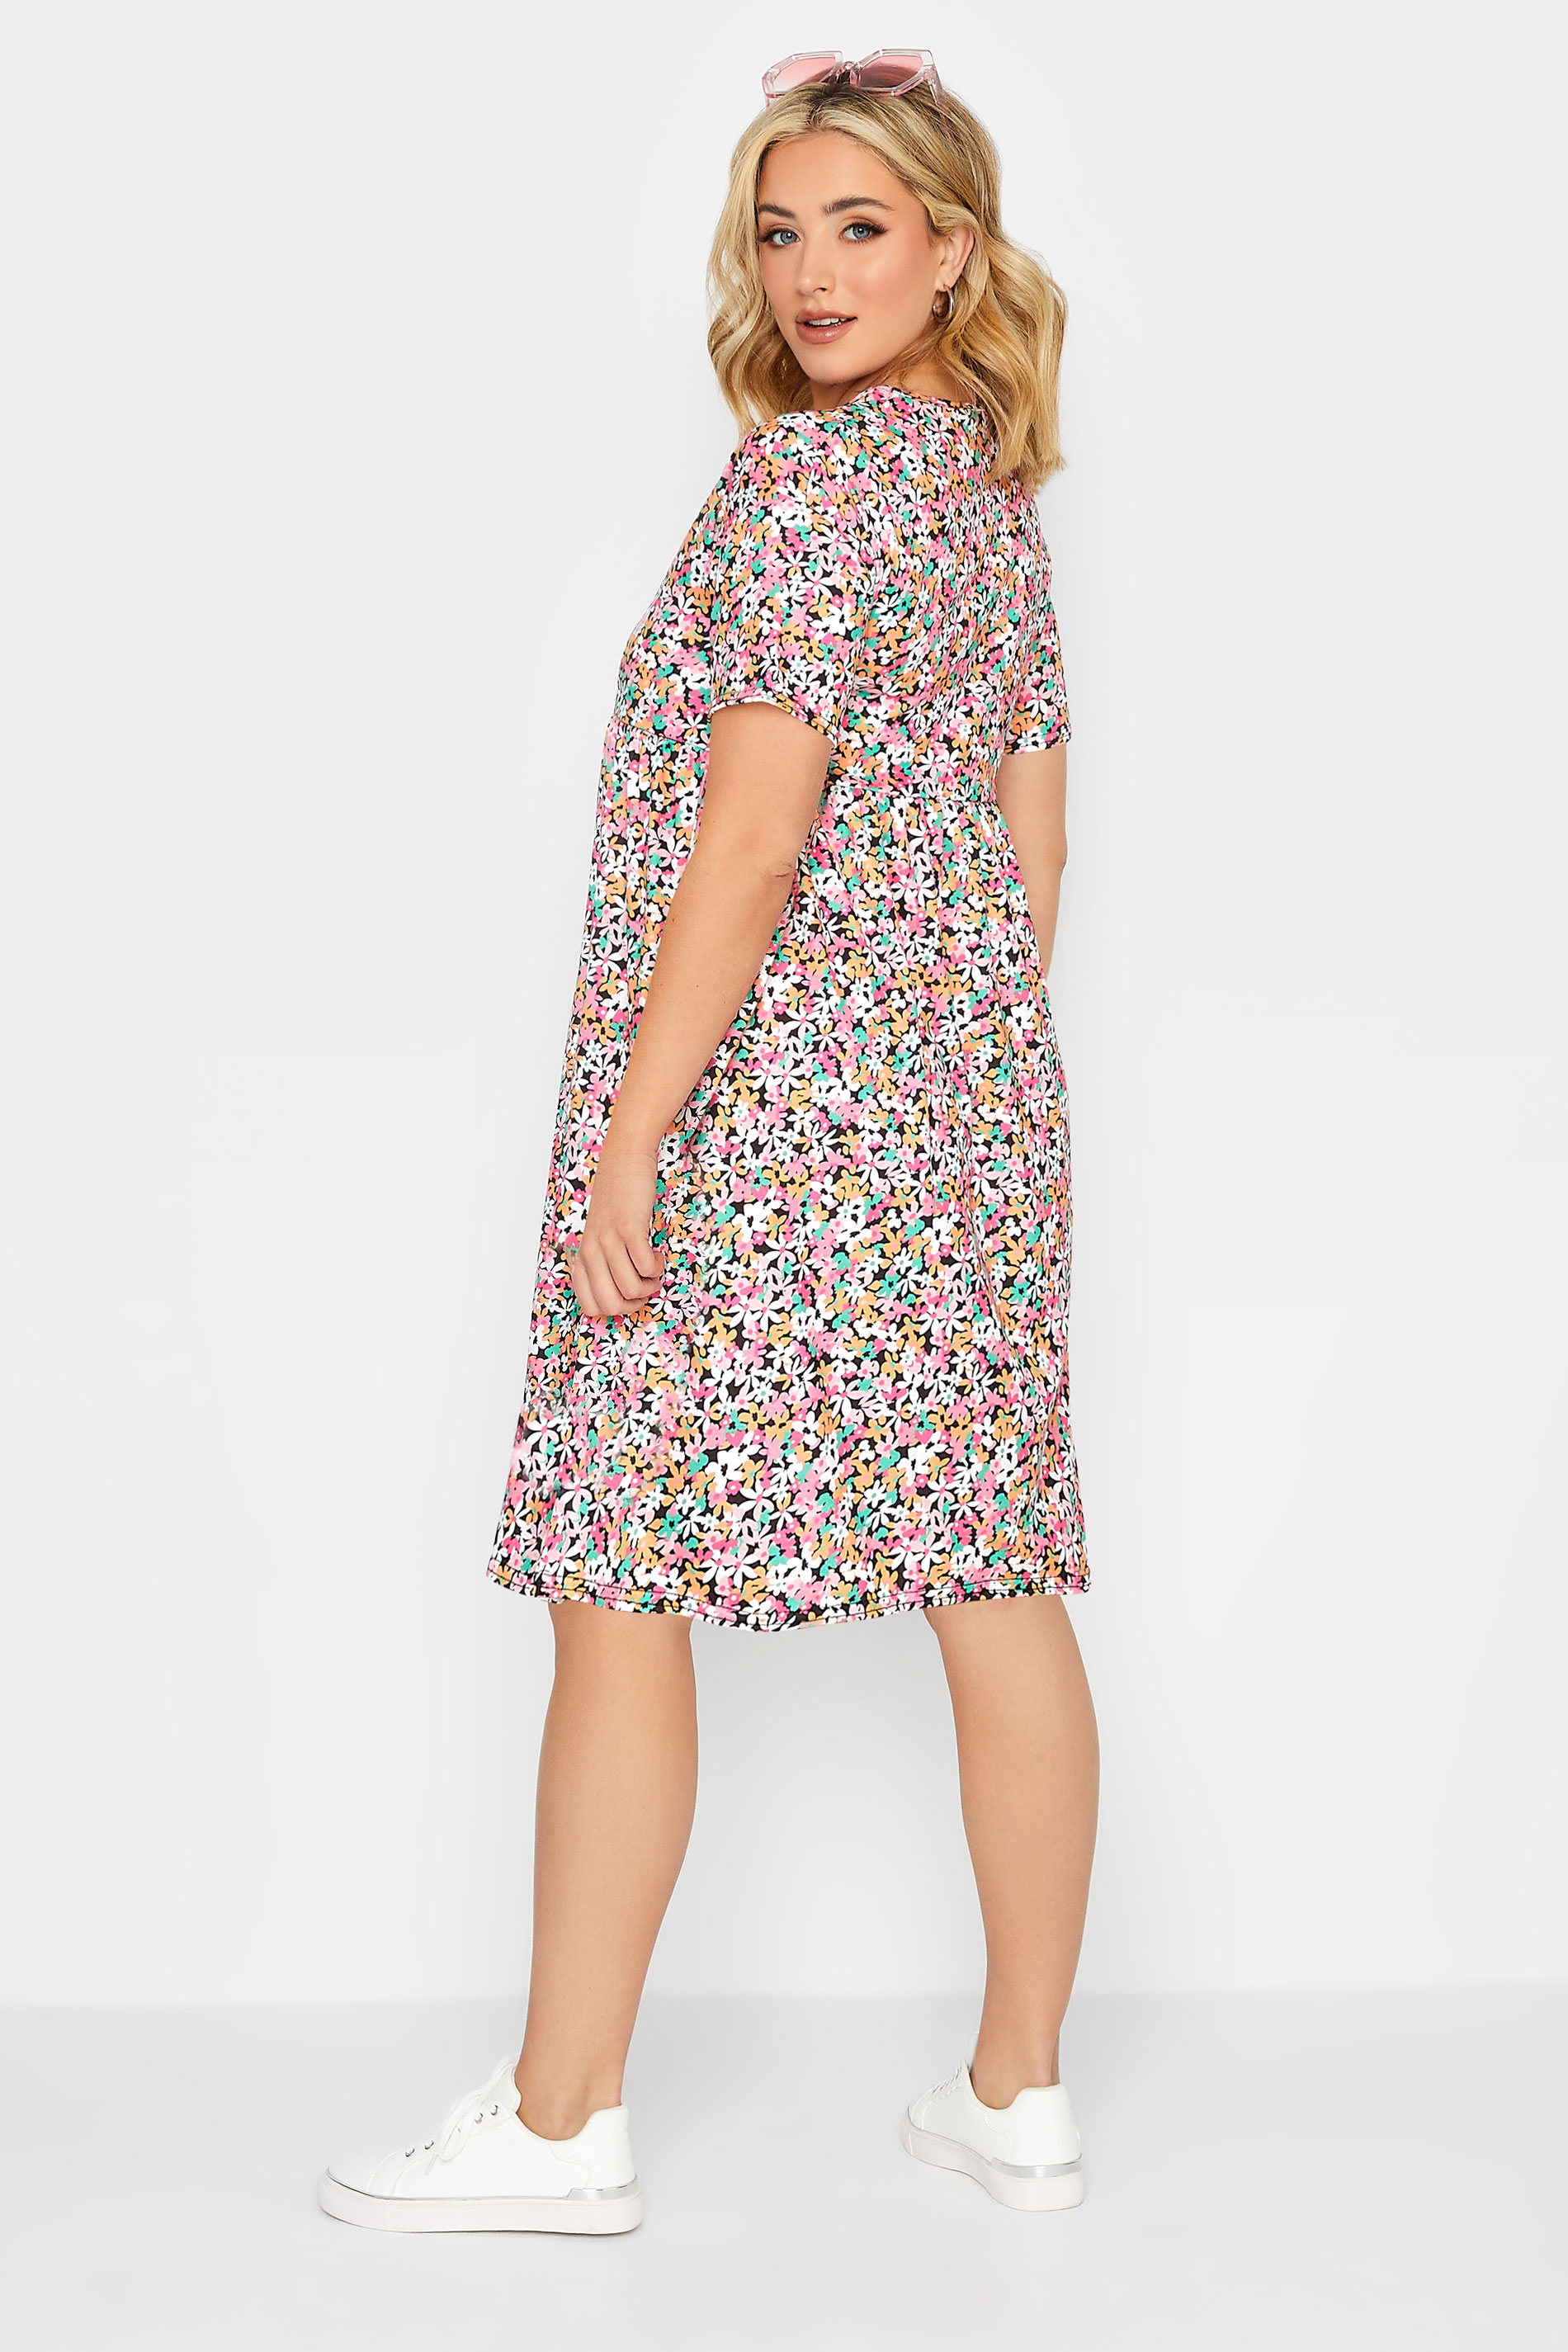 YOURS PETITE Plus Size Pink Ditsy Floral Print Smock Dress | Yours Clothing 3